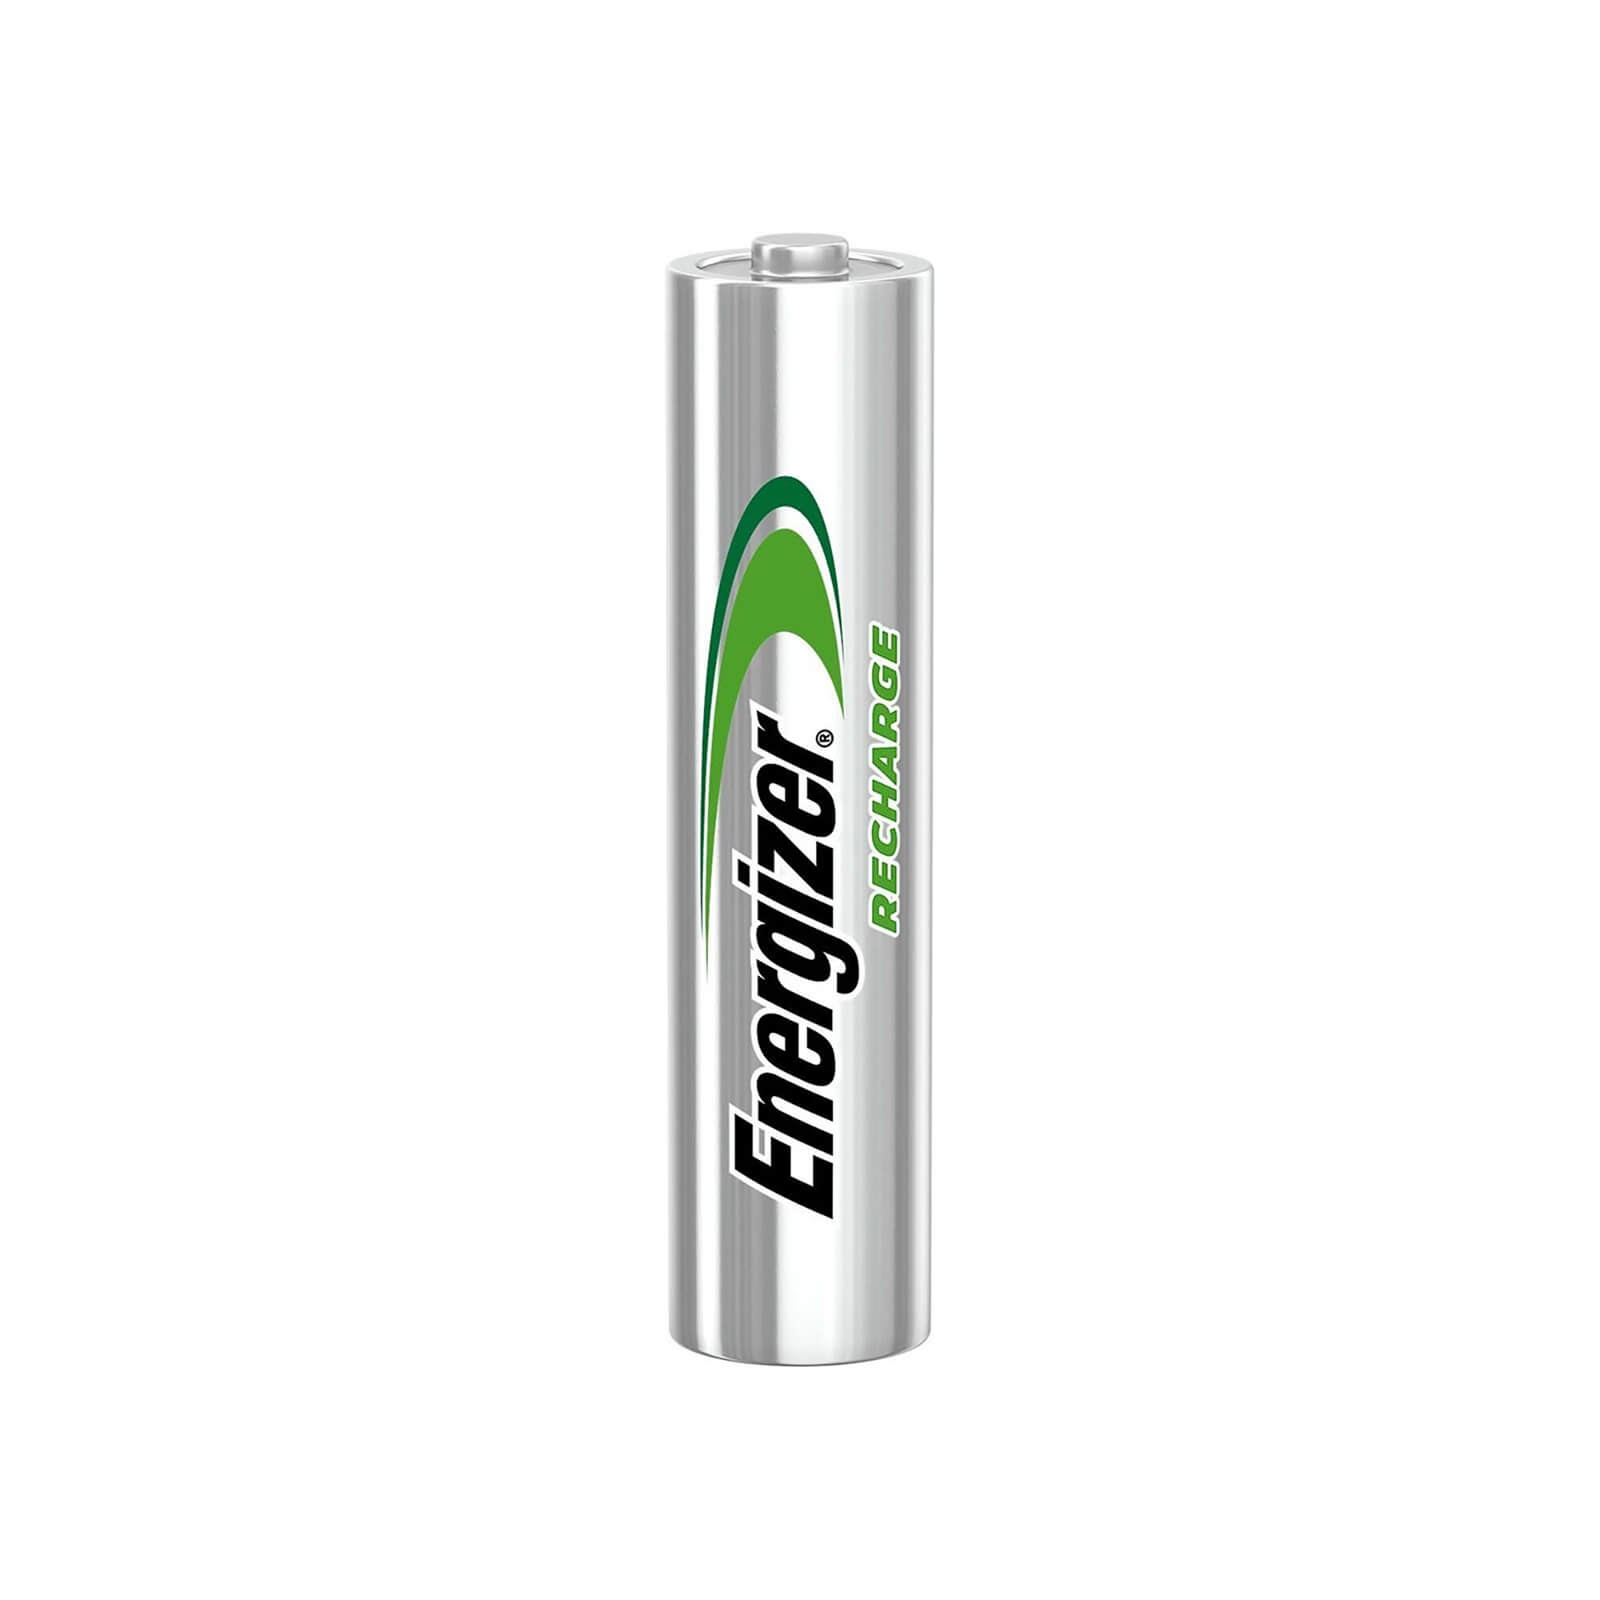 Energizer Universal 500mAh Rechargeable AAA Batteries - 4 Pack